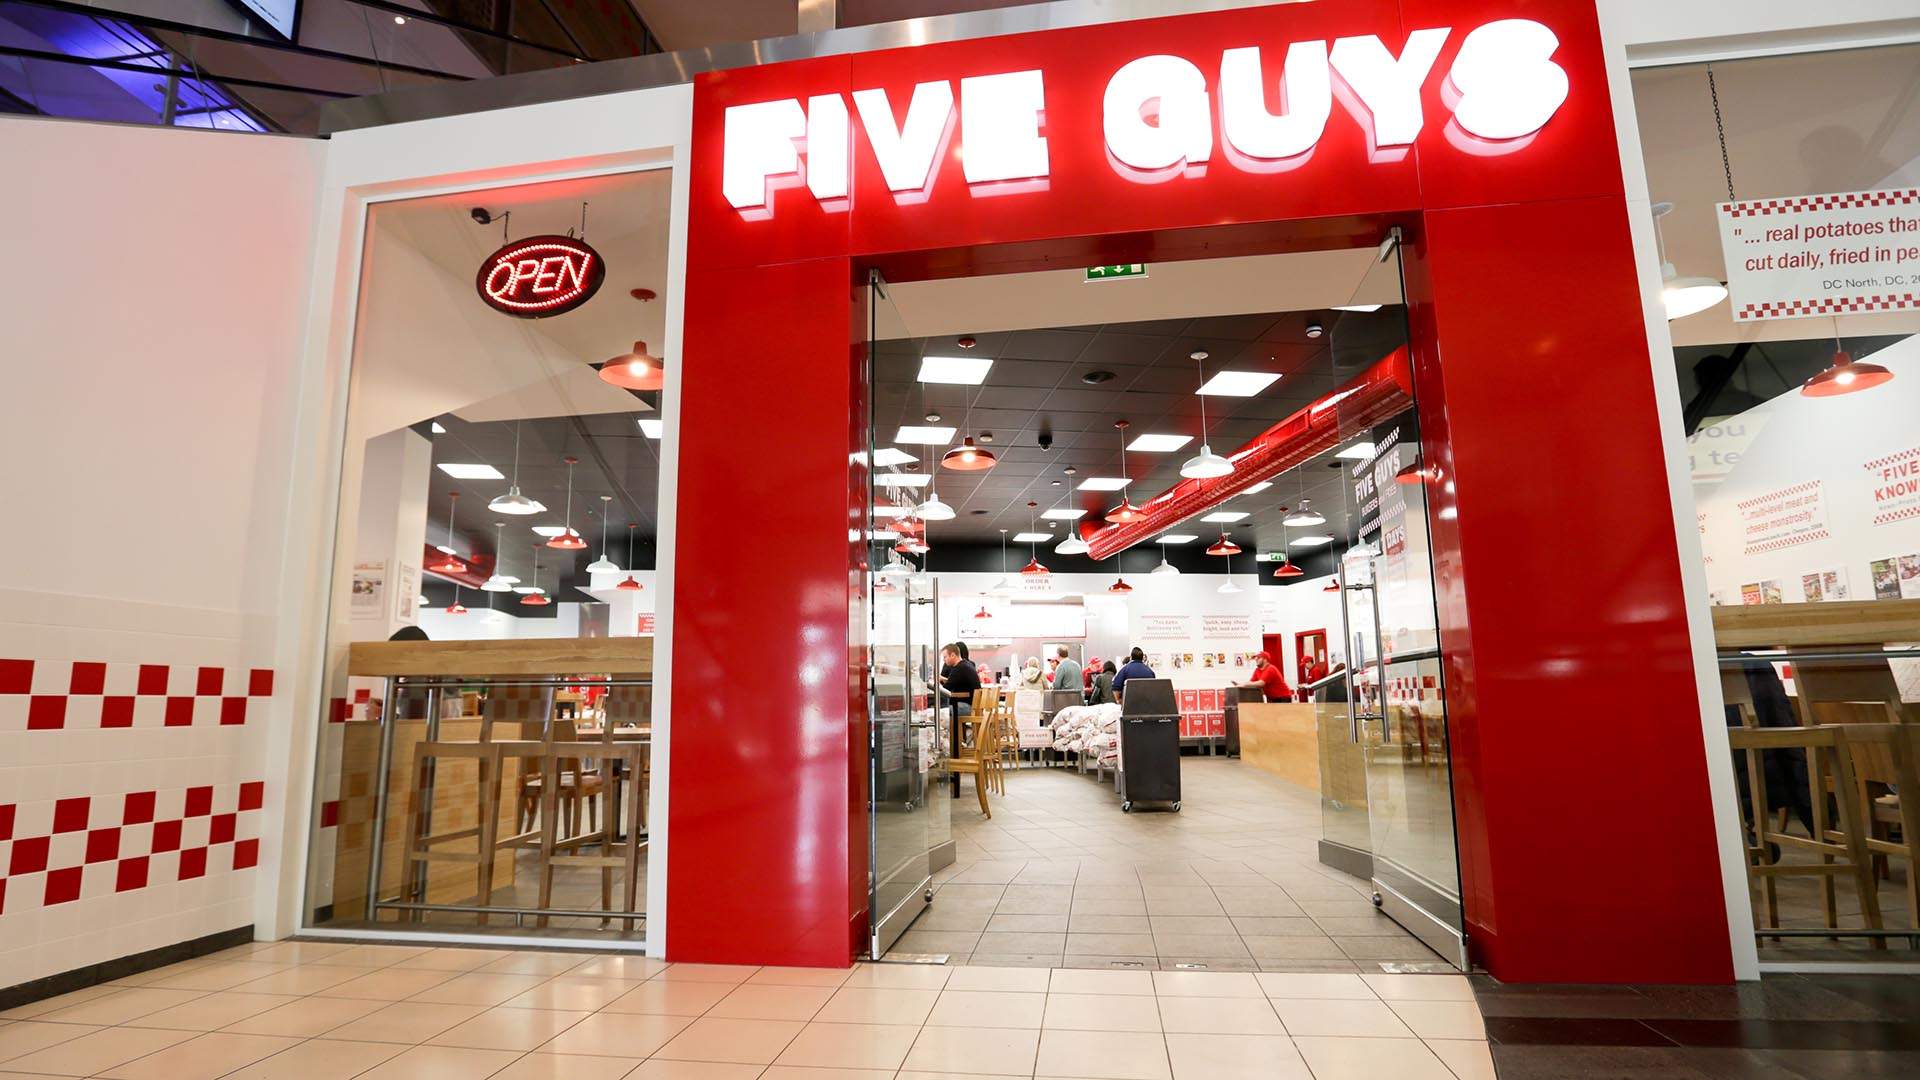 Cult-Favourite US Chain Five Guys Will Open Its First Australian Eatery in Penrith This Year